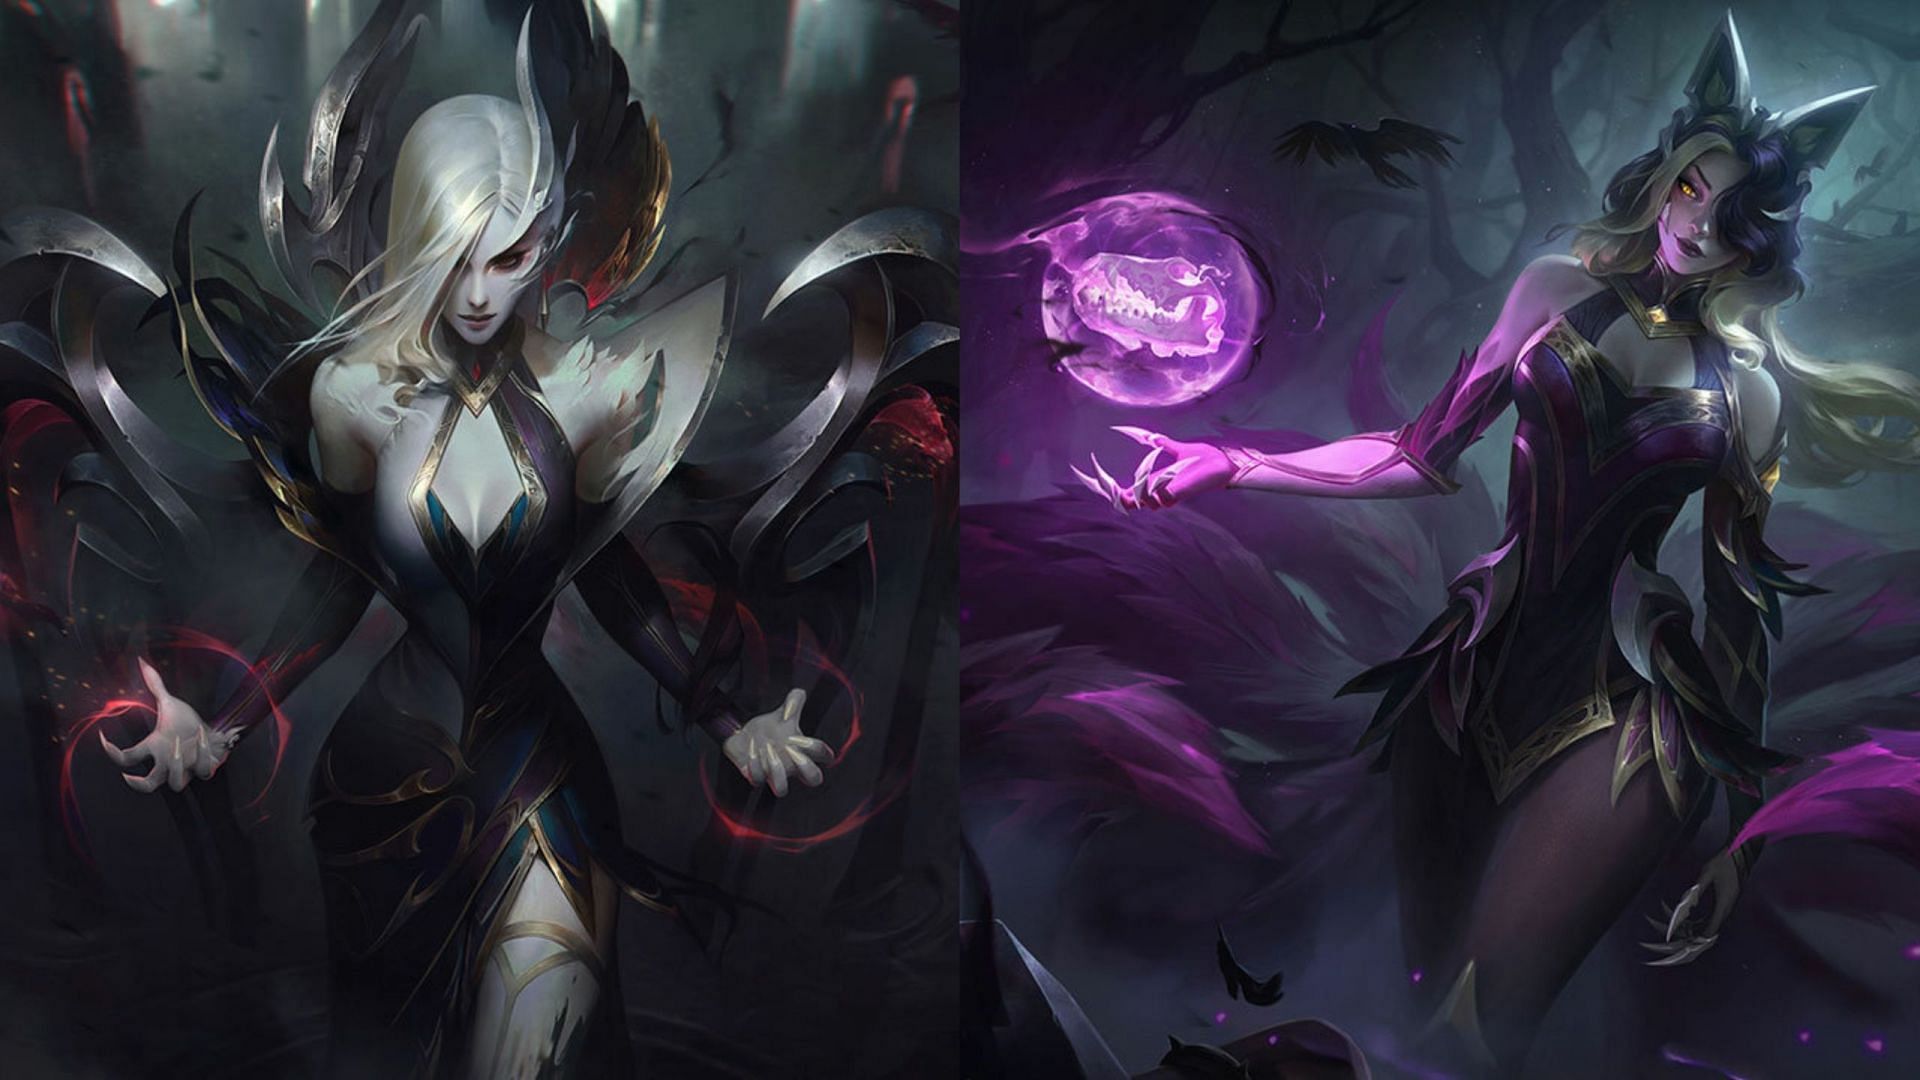 The sisterhood stirs. Join a new coven. - League of Legends